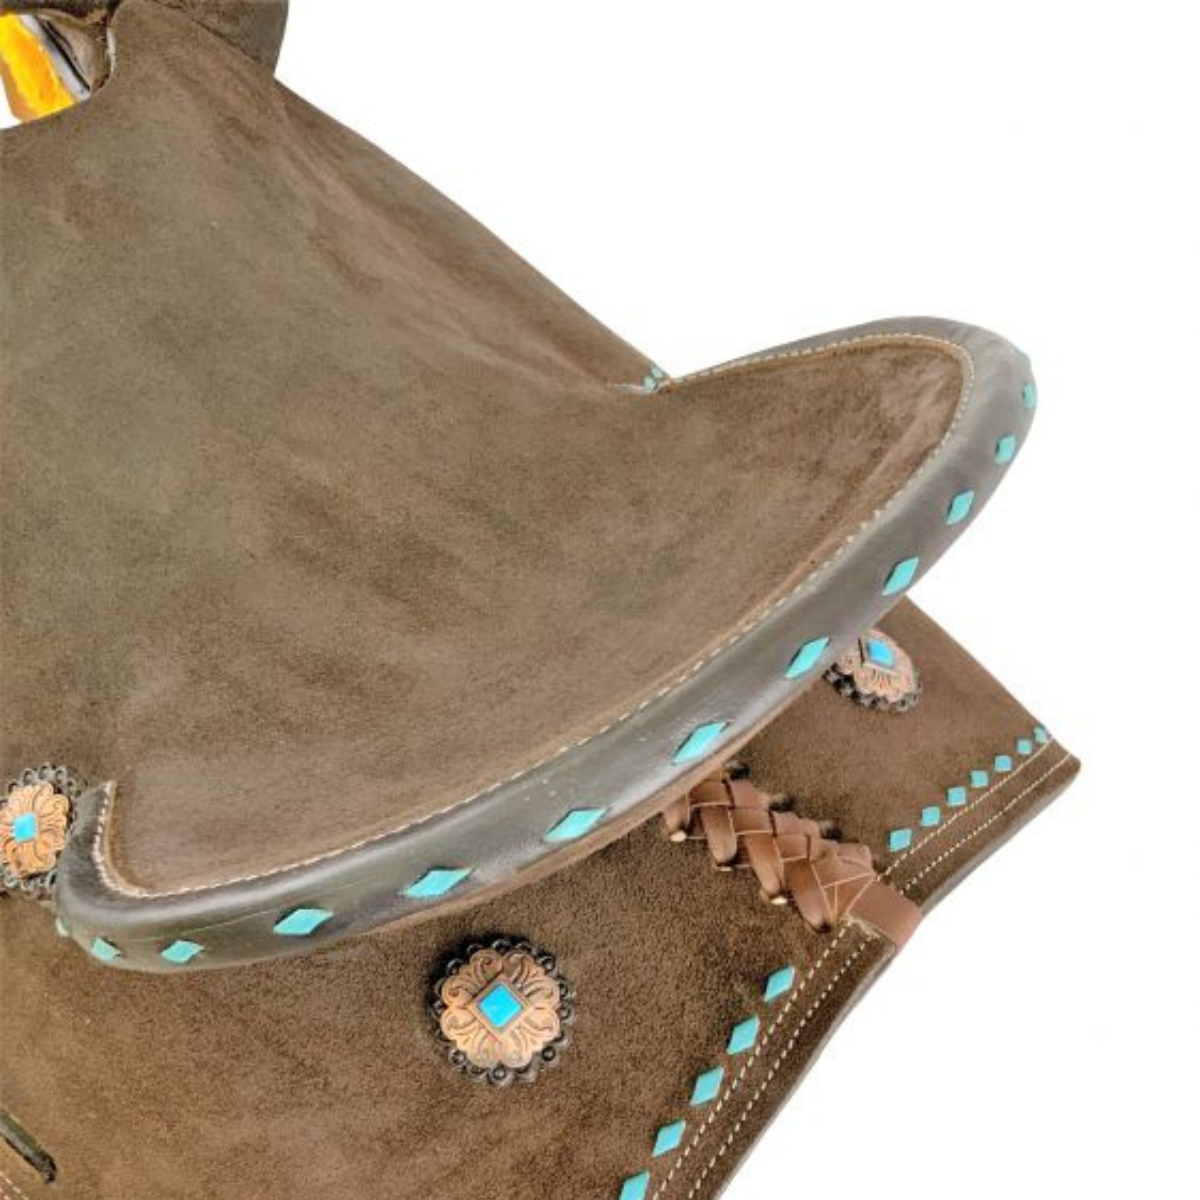 12"  DOUBLE T   BARREL STYLE SADDLE WITH OILED ROUGH OUT LEATHER, TEAL BUCKSTITCH ACCENTS AND FLOWER CONCHOS - Double T Saddles